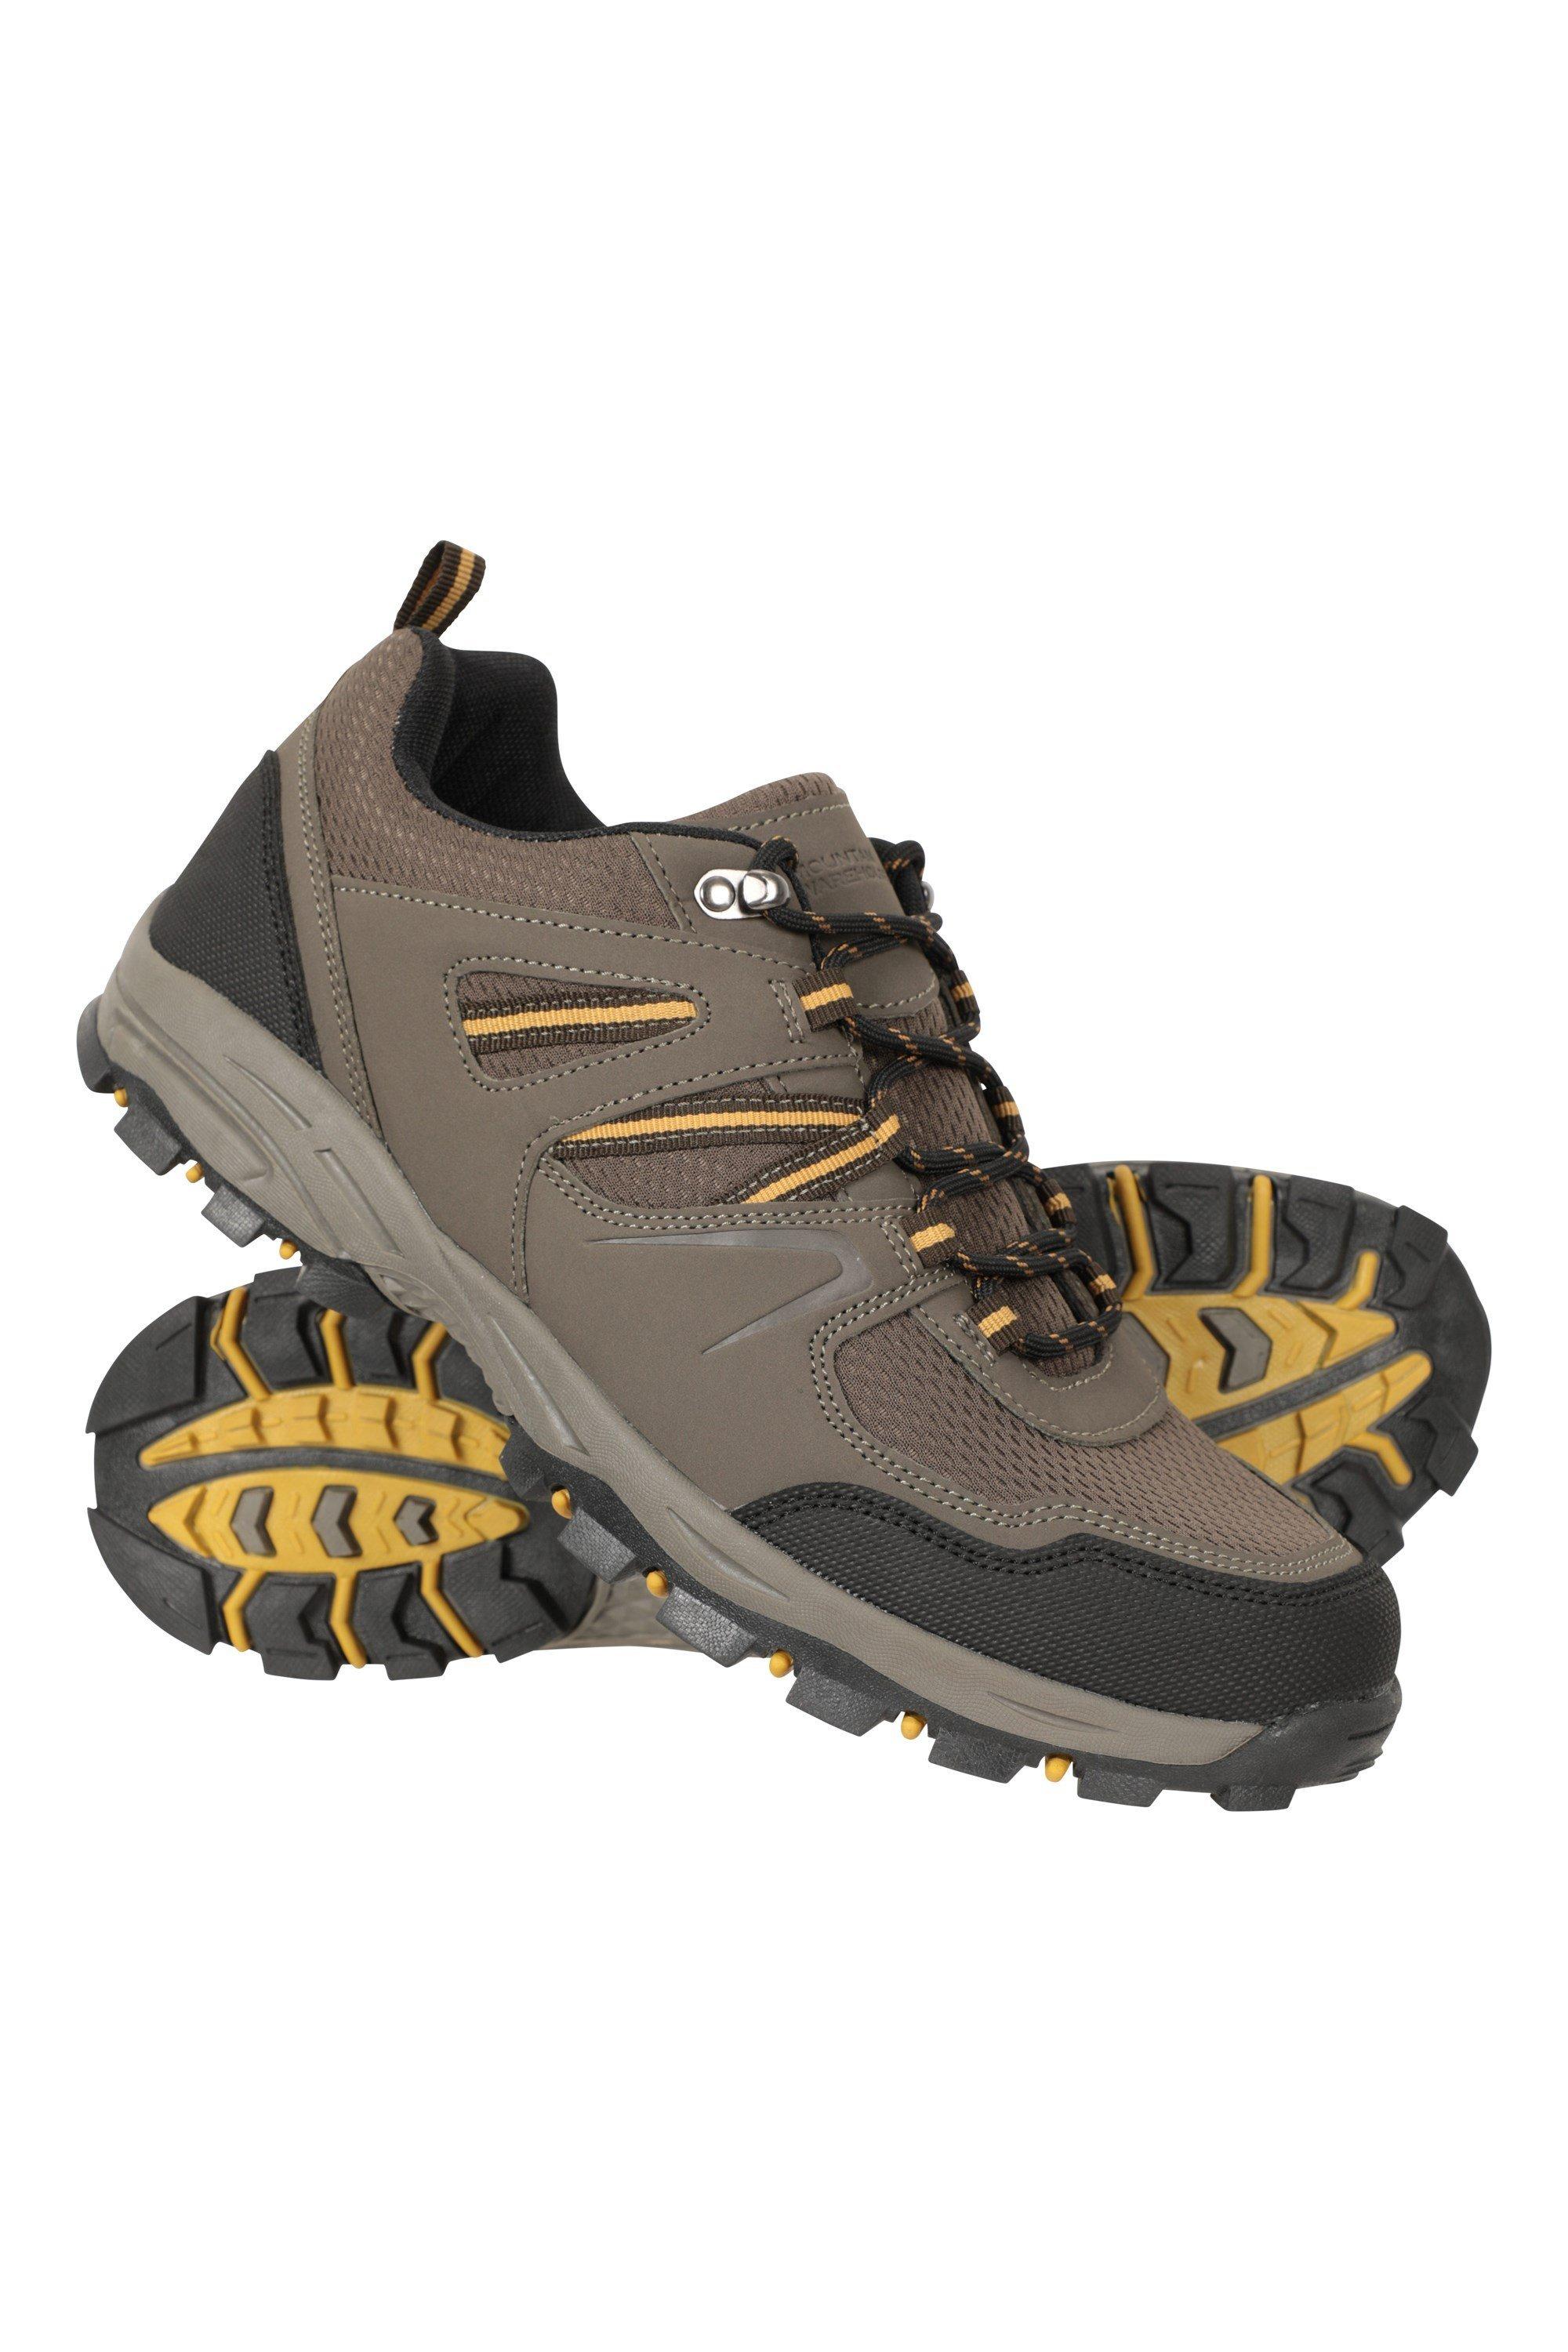 envision by colin mcleod force sight thief psycho by colin mcleod divine by colin mcleod magic tricks Кроссовки Mcleod Outdoor Walking Shoes Casual Hiking Trainers Mountain Warehouse, коричневый